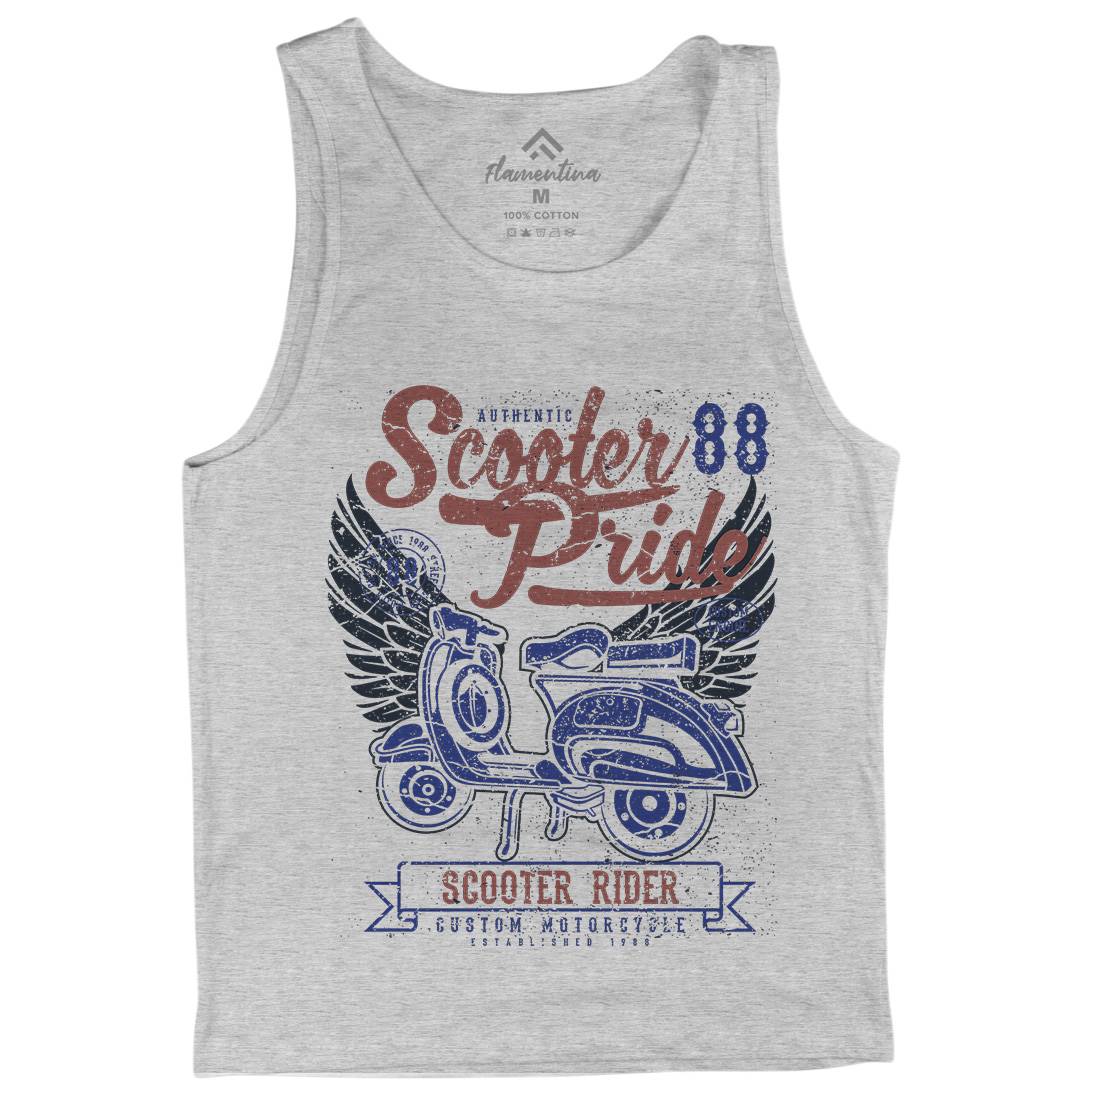 Scooter Pride Mens Tank Top Vest Motorcycles A135